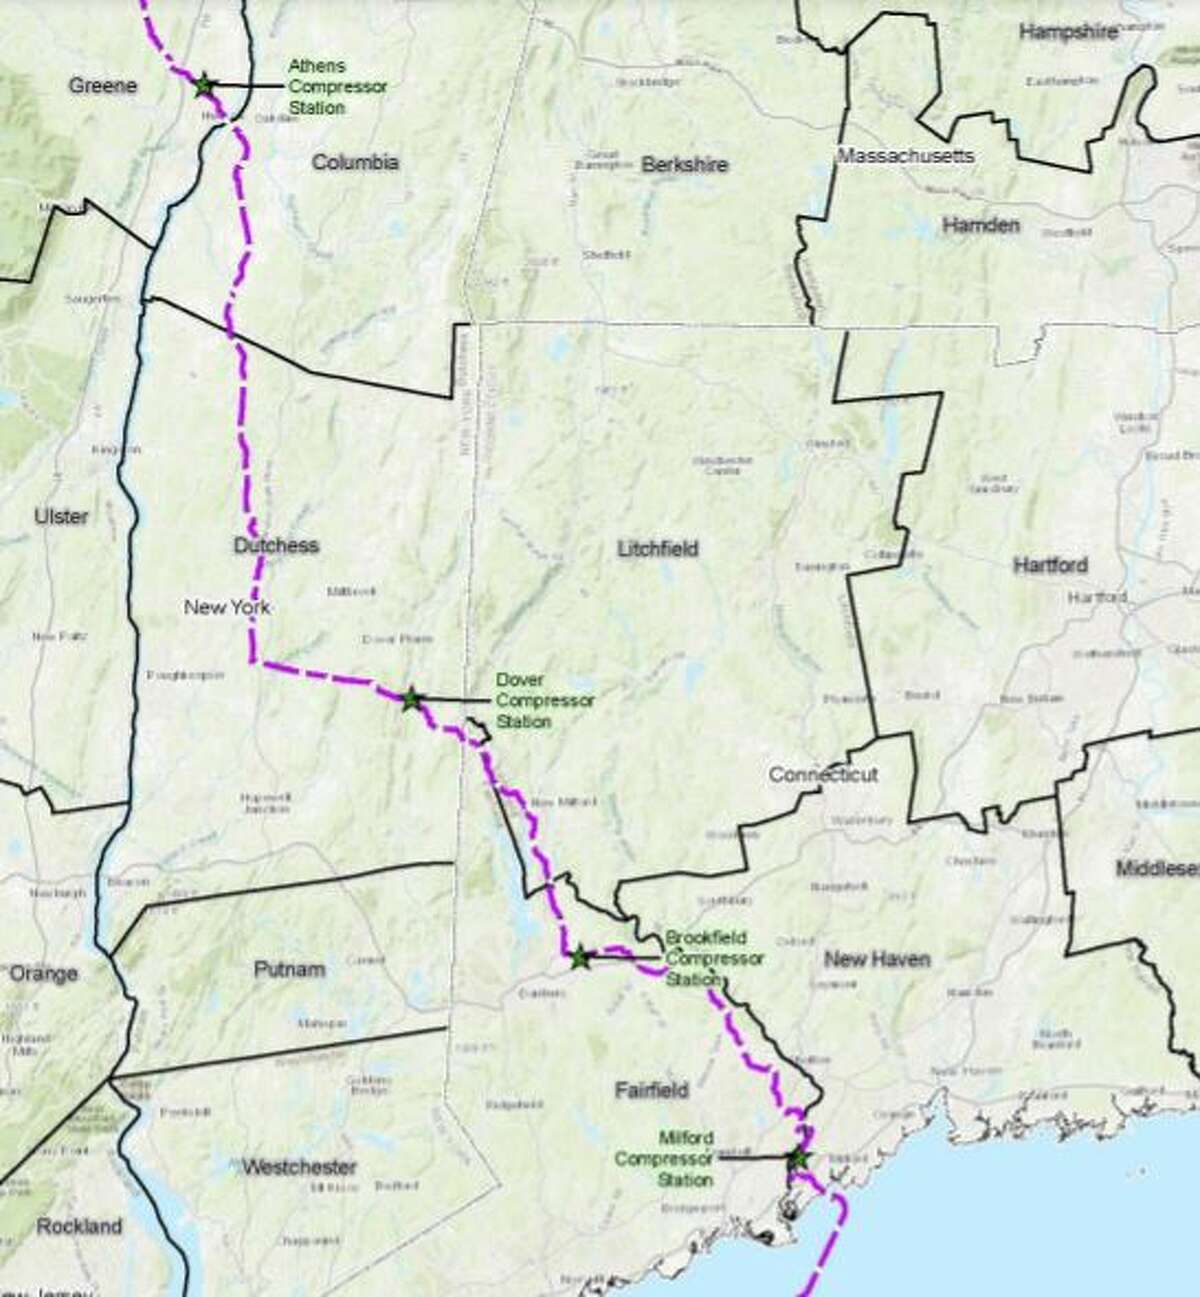 The Iroquois pipeline proposal would add compressors at three points: Athens, Dover, and Brookfield, Conn. The effort in Athens is drawing opposition from environmental groups and concern from the state Department of Environmental Conservation.